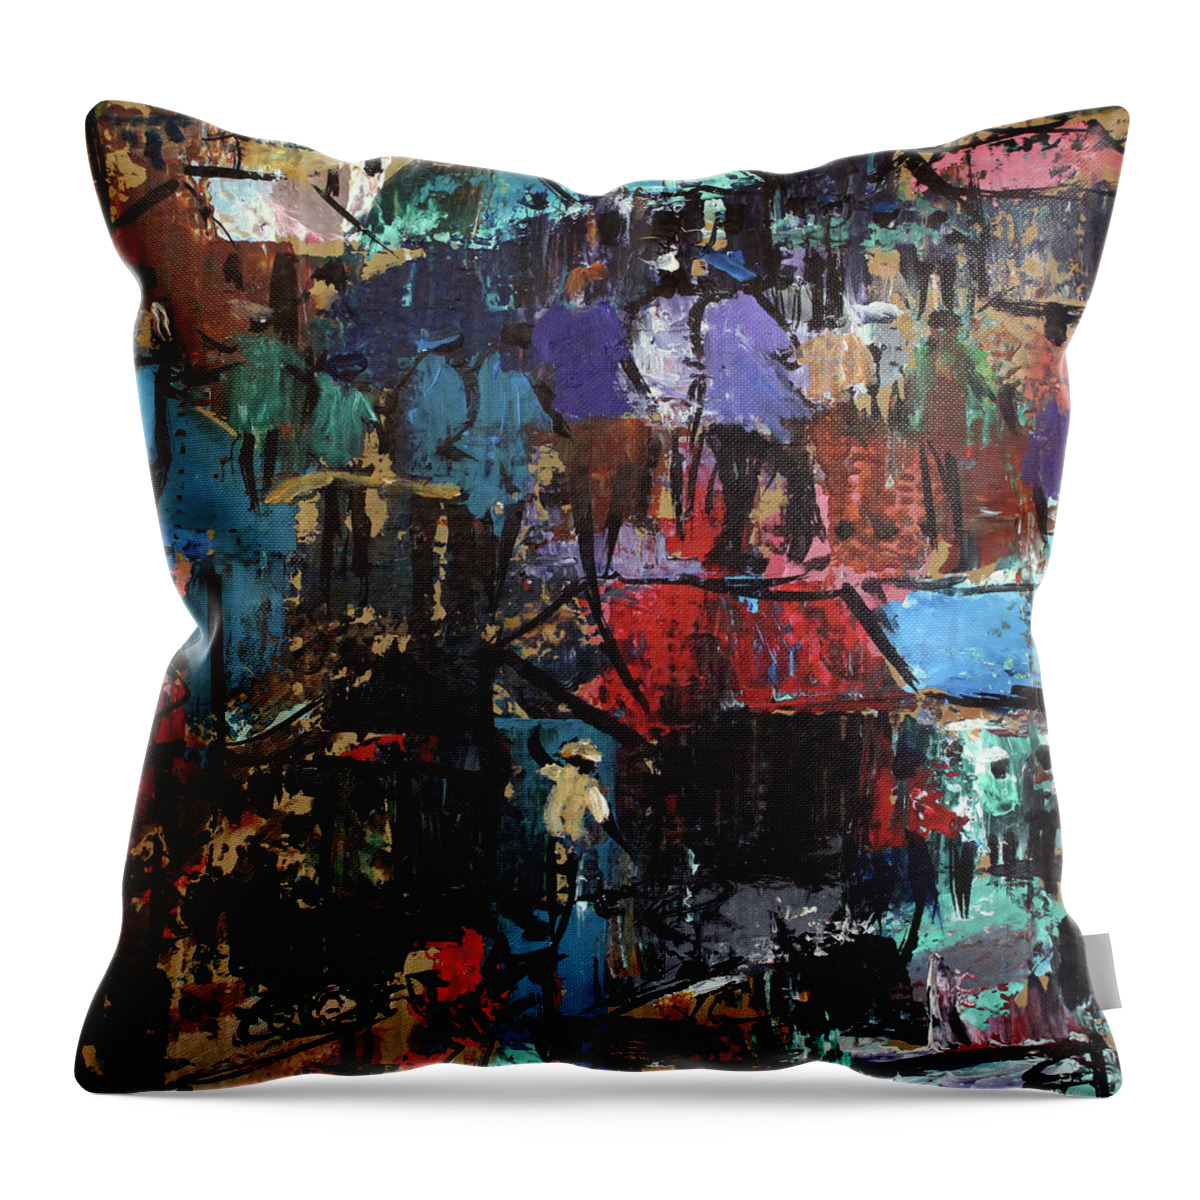  Throw Pillow featuring the painting This Is Us by Joe Maseko